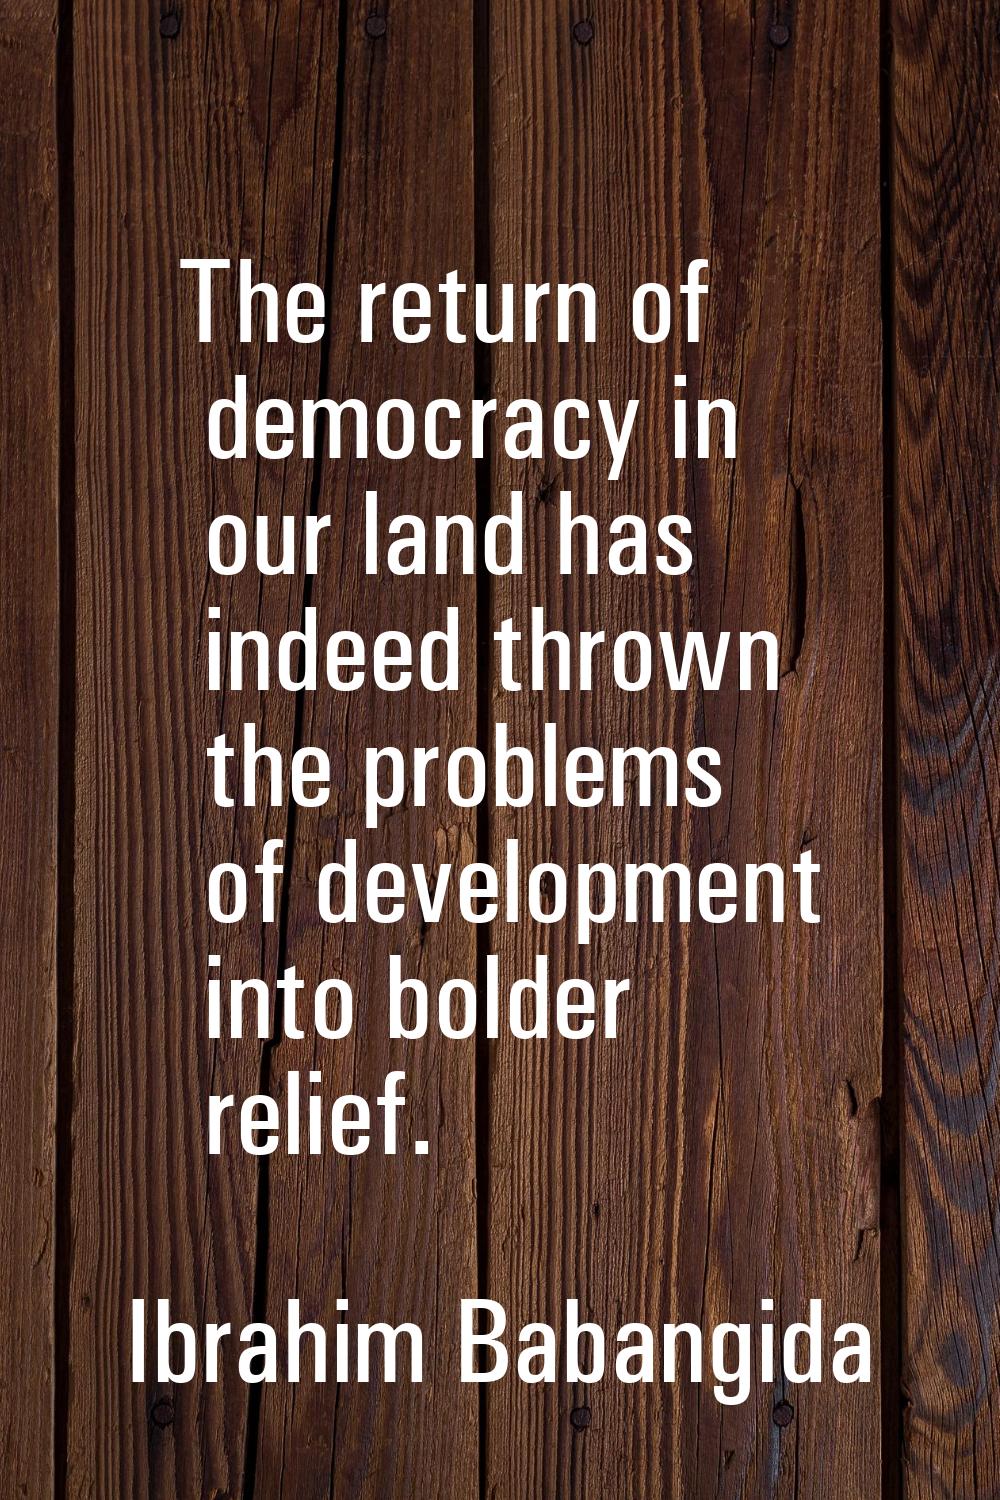 The return of democracy in our land has indeed thrown the problems of development into bolder relie